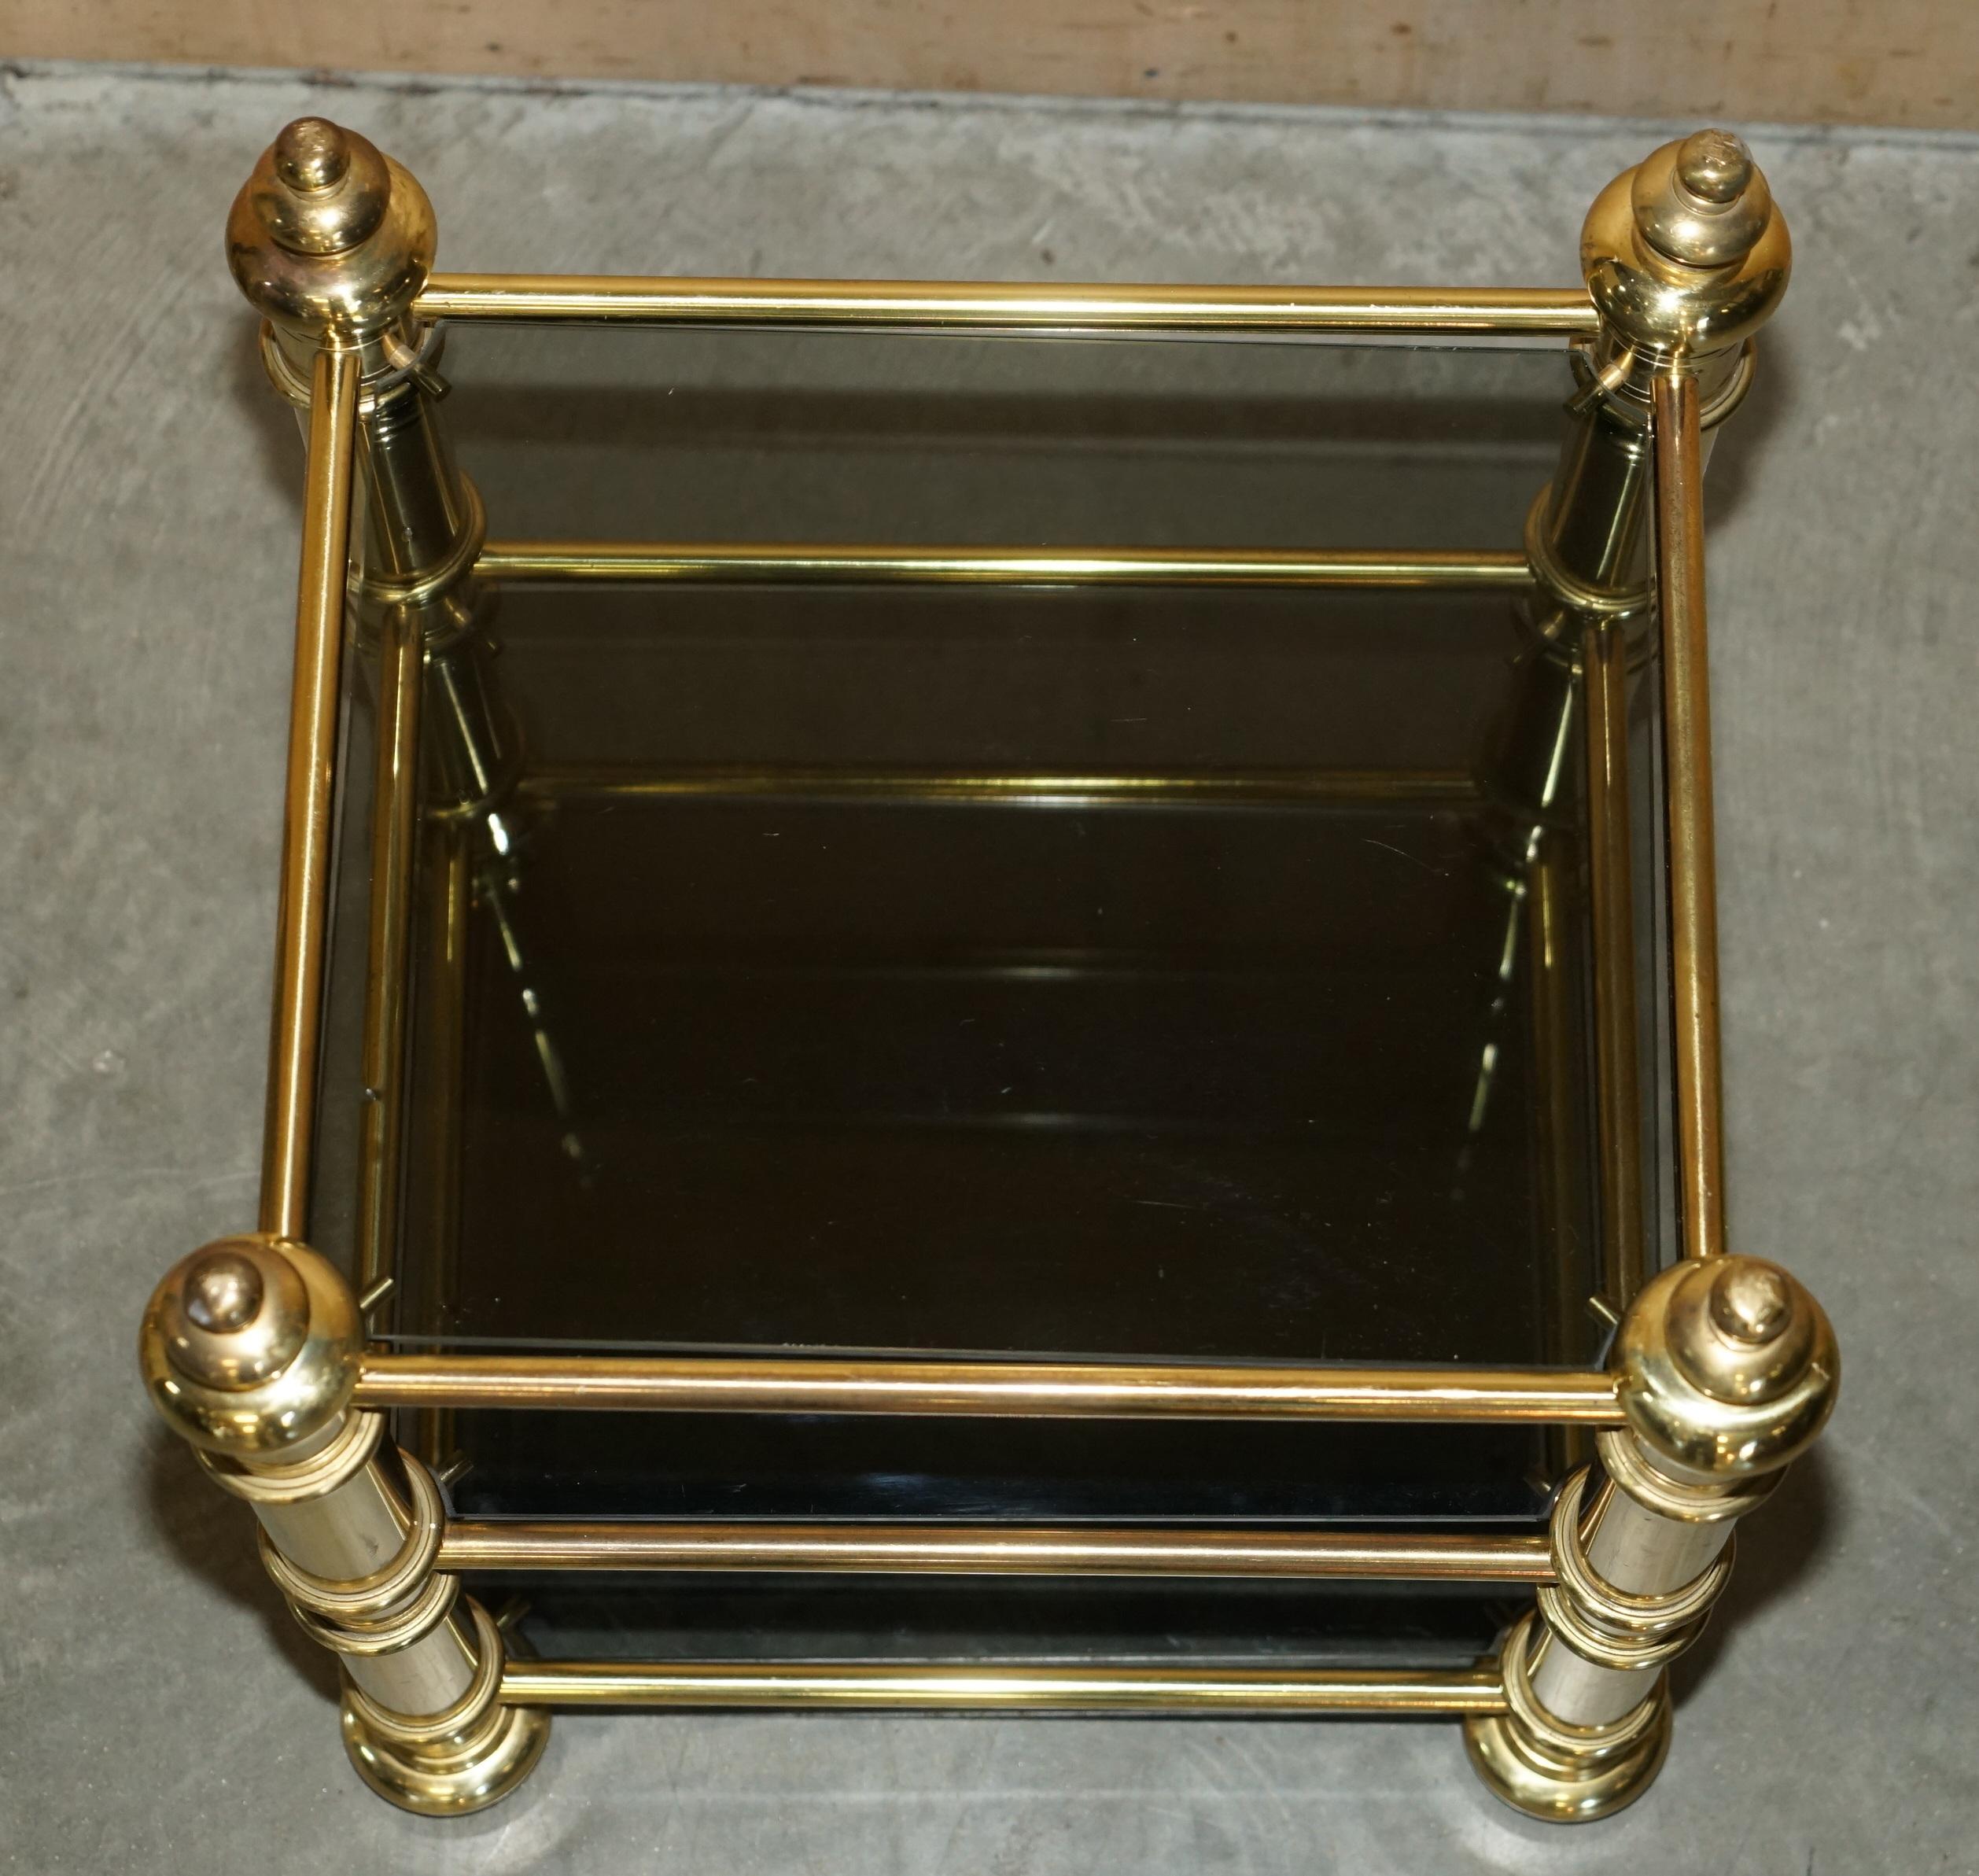 European ViNTAGE PAIR OF MID CENTURY MODERN BRASS & SMOKED GLASS ETAGERE SIDE END TABLES For Sale